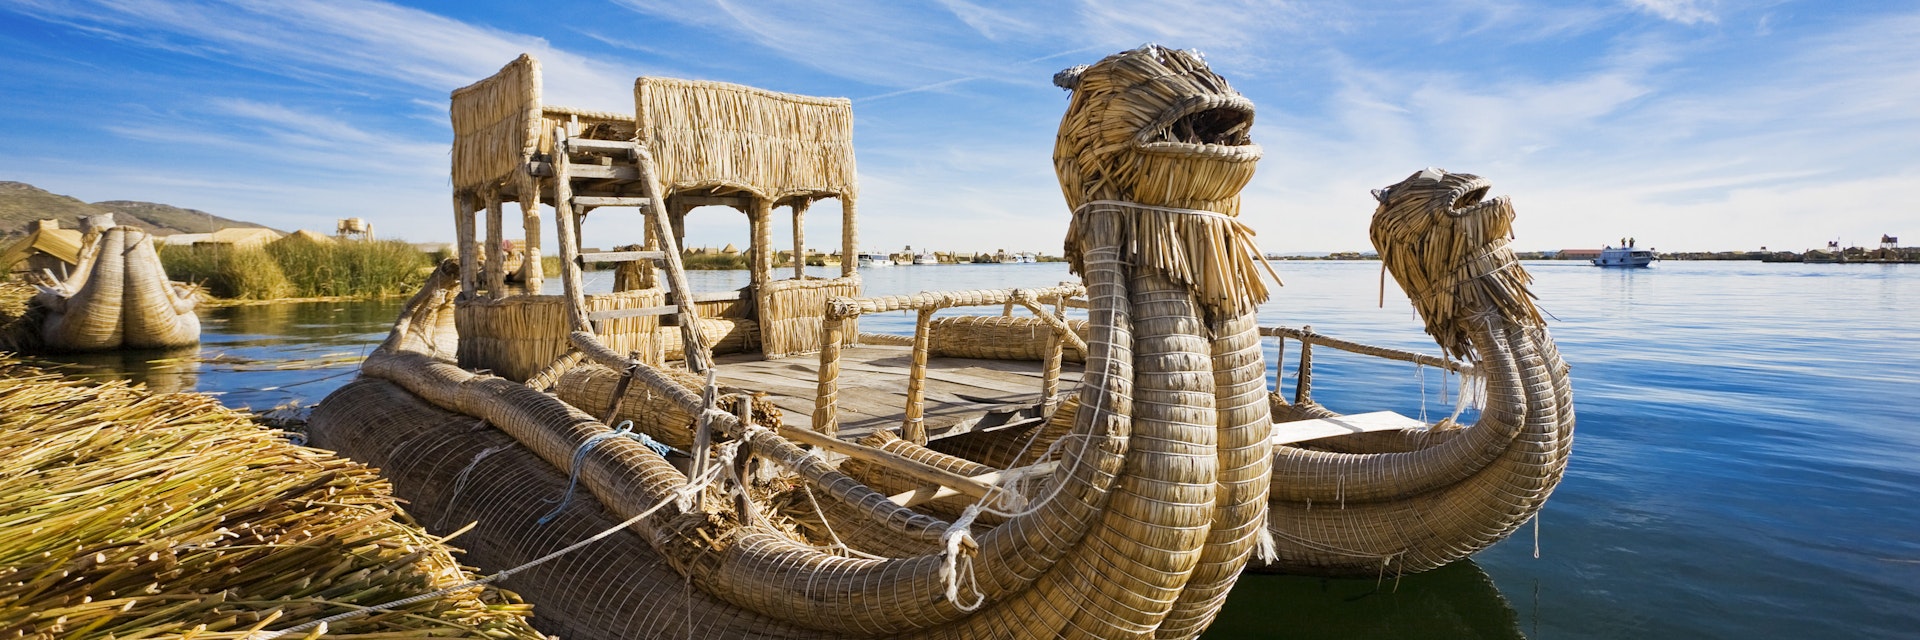 Reed boat on Lake Titicaca.